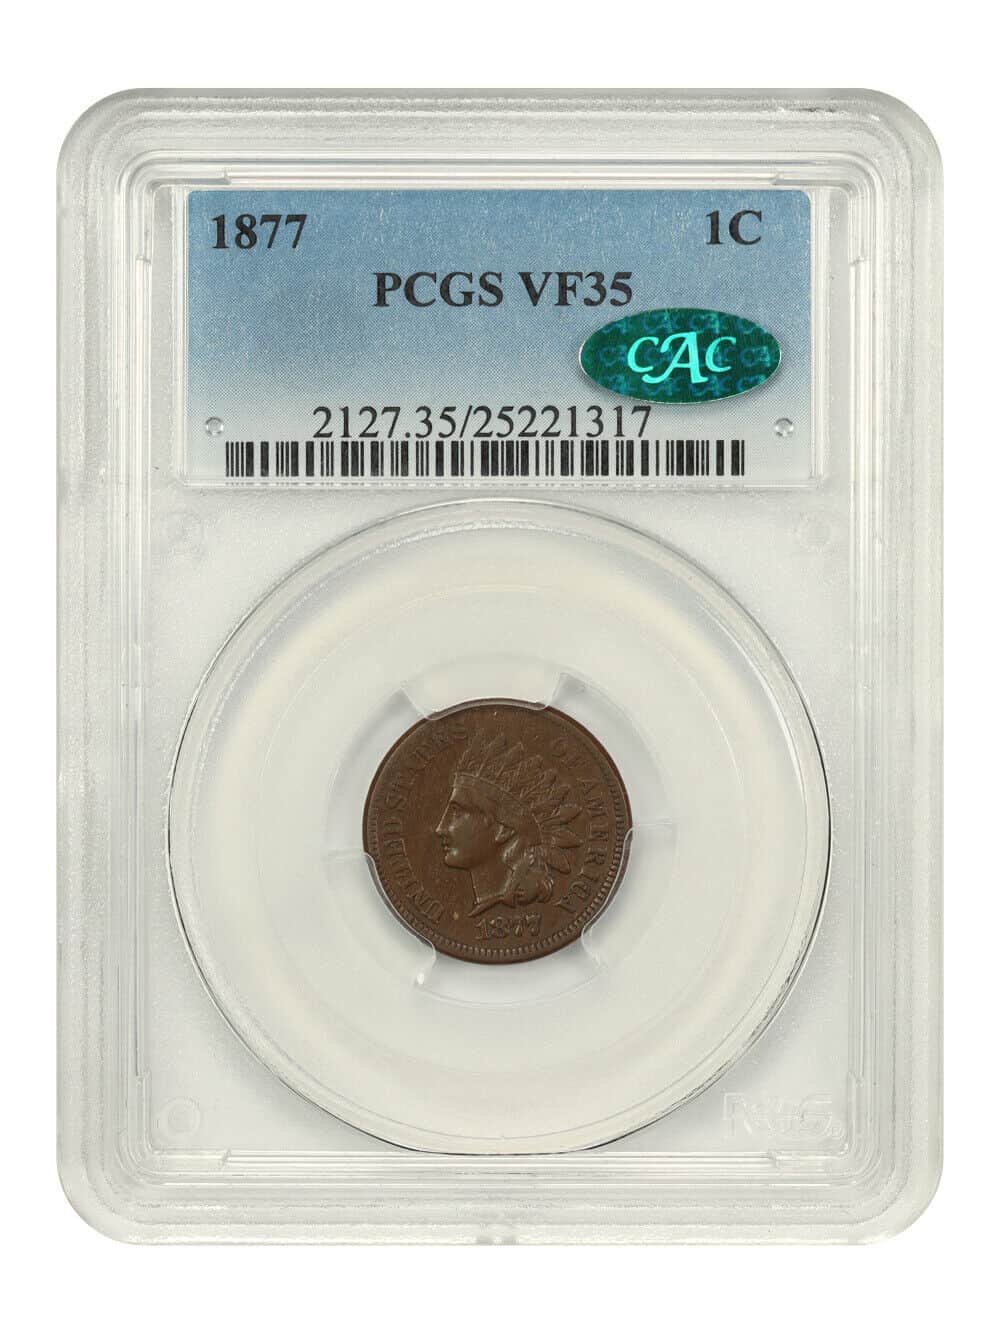 1877 1c PCGSCAC VF35 - Elusive Key Date Indian Cent - Indian Cent